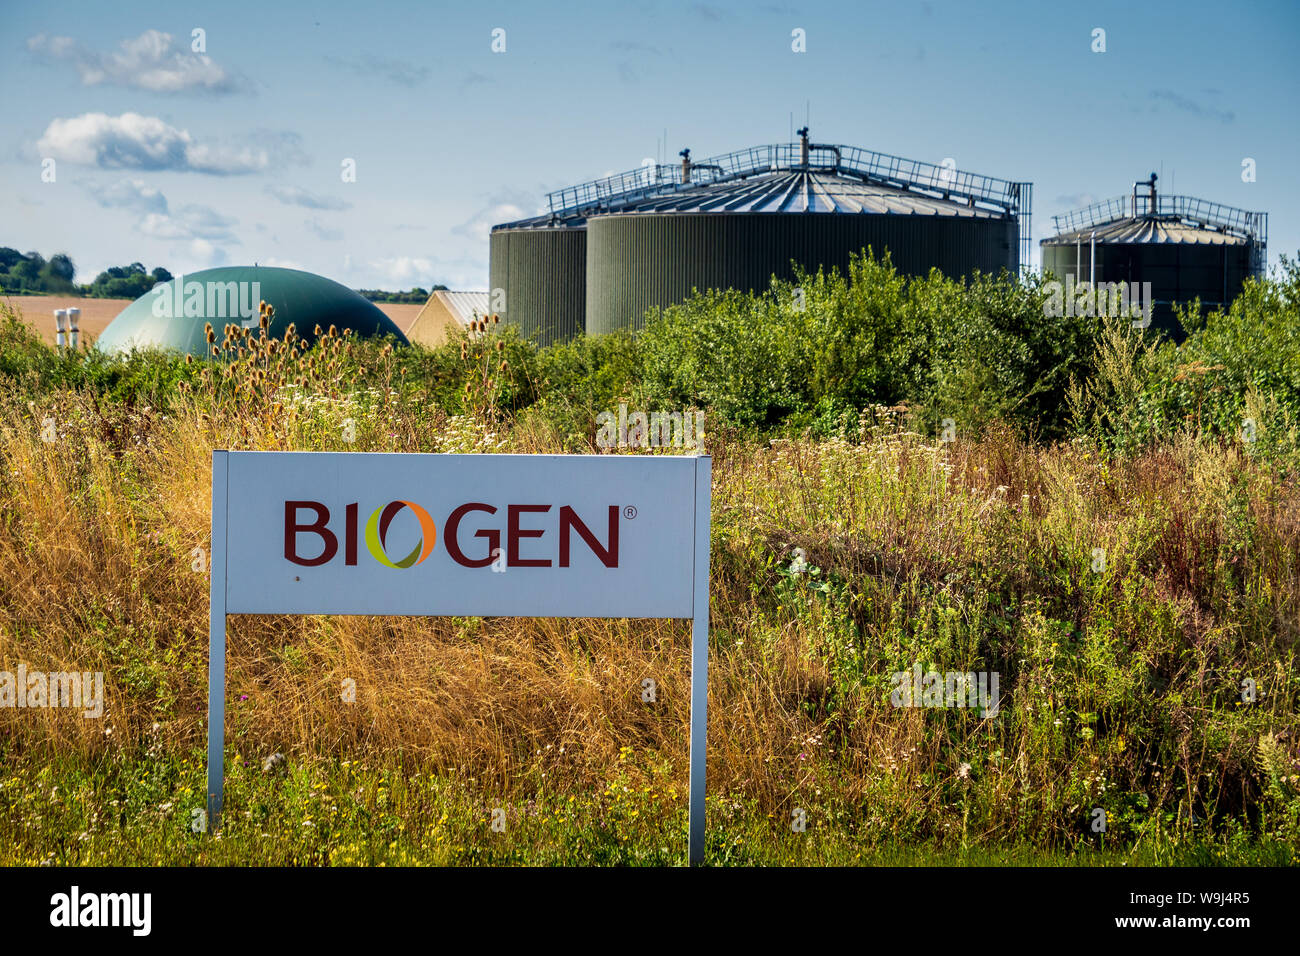 Biogen food waste recycling plant Baldock Herts. Anaerobic digestion plant processes 45,000 tonnes of food waste/yr generating 2.6MW green electricity Stock Photo